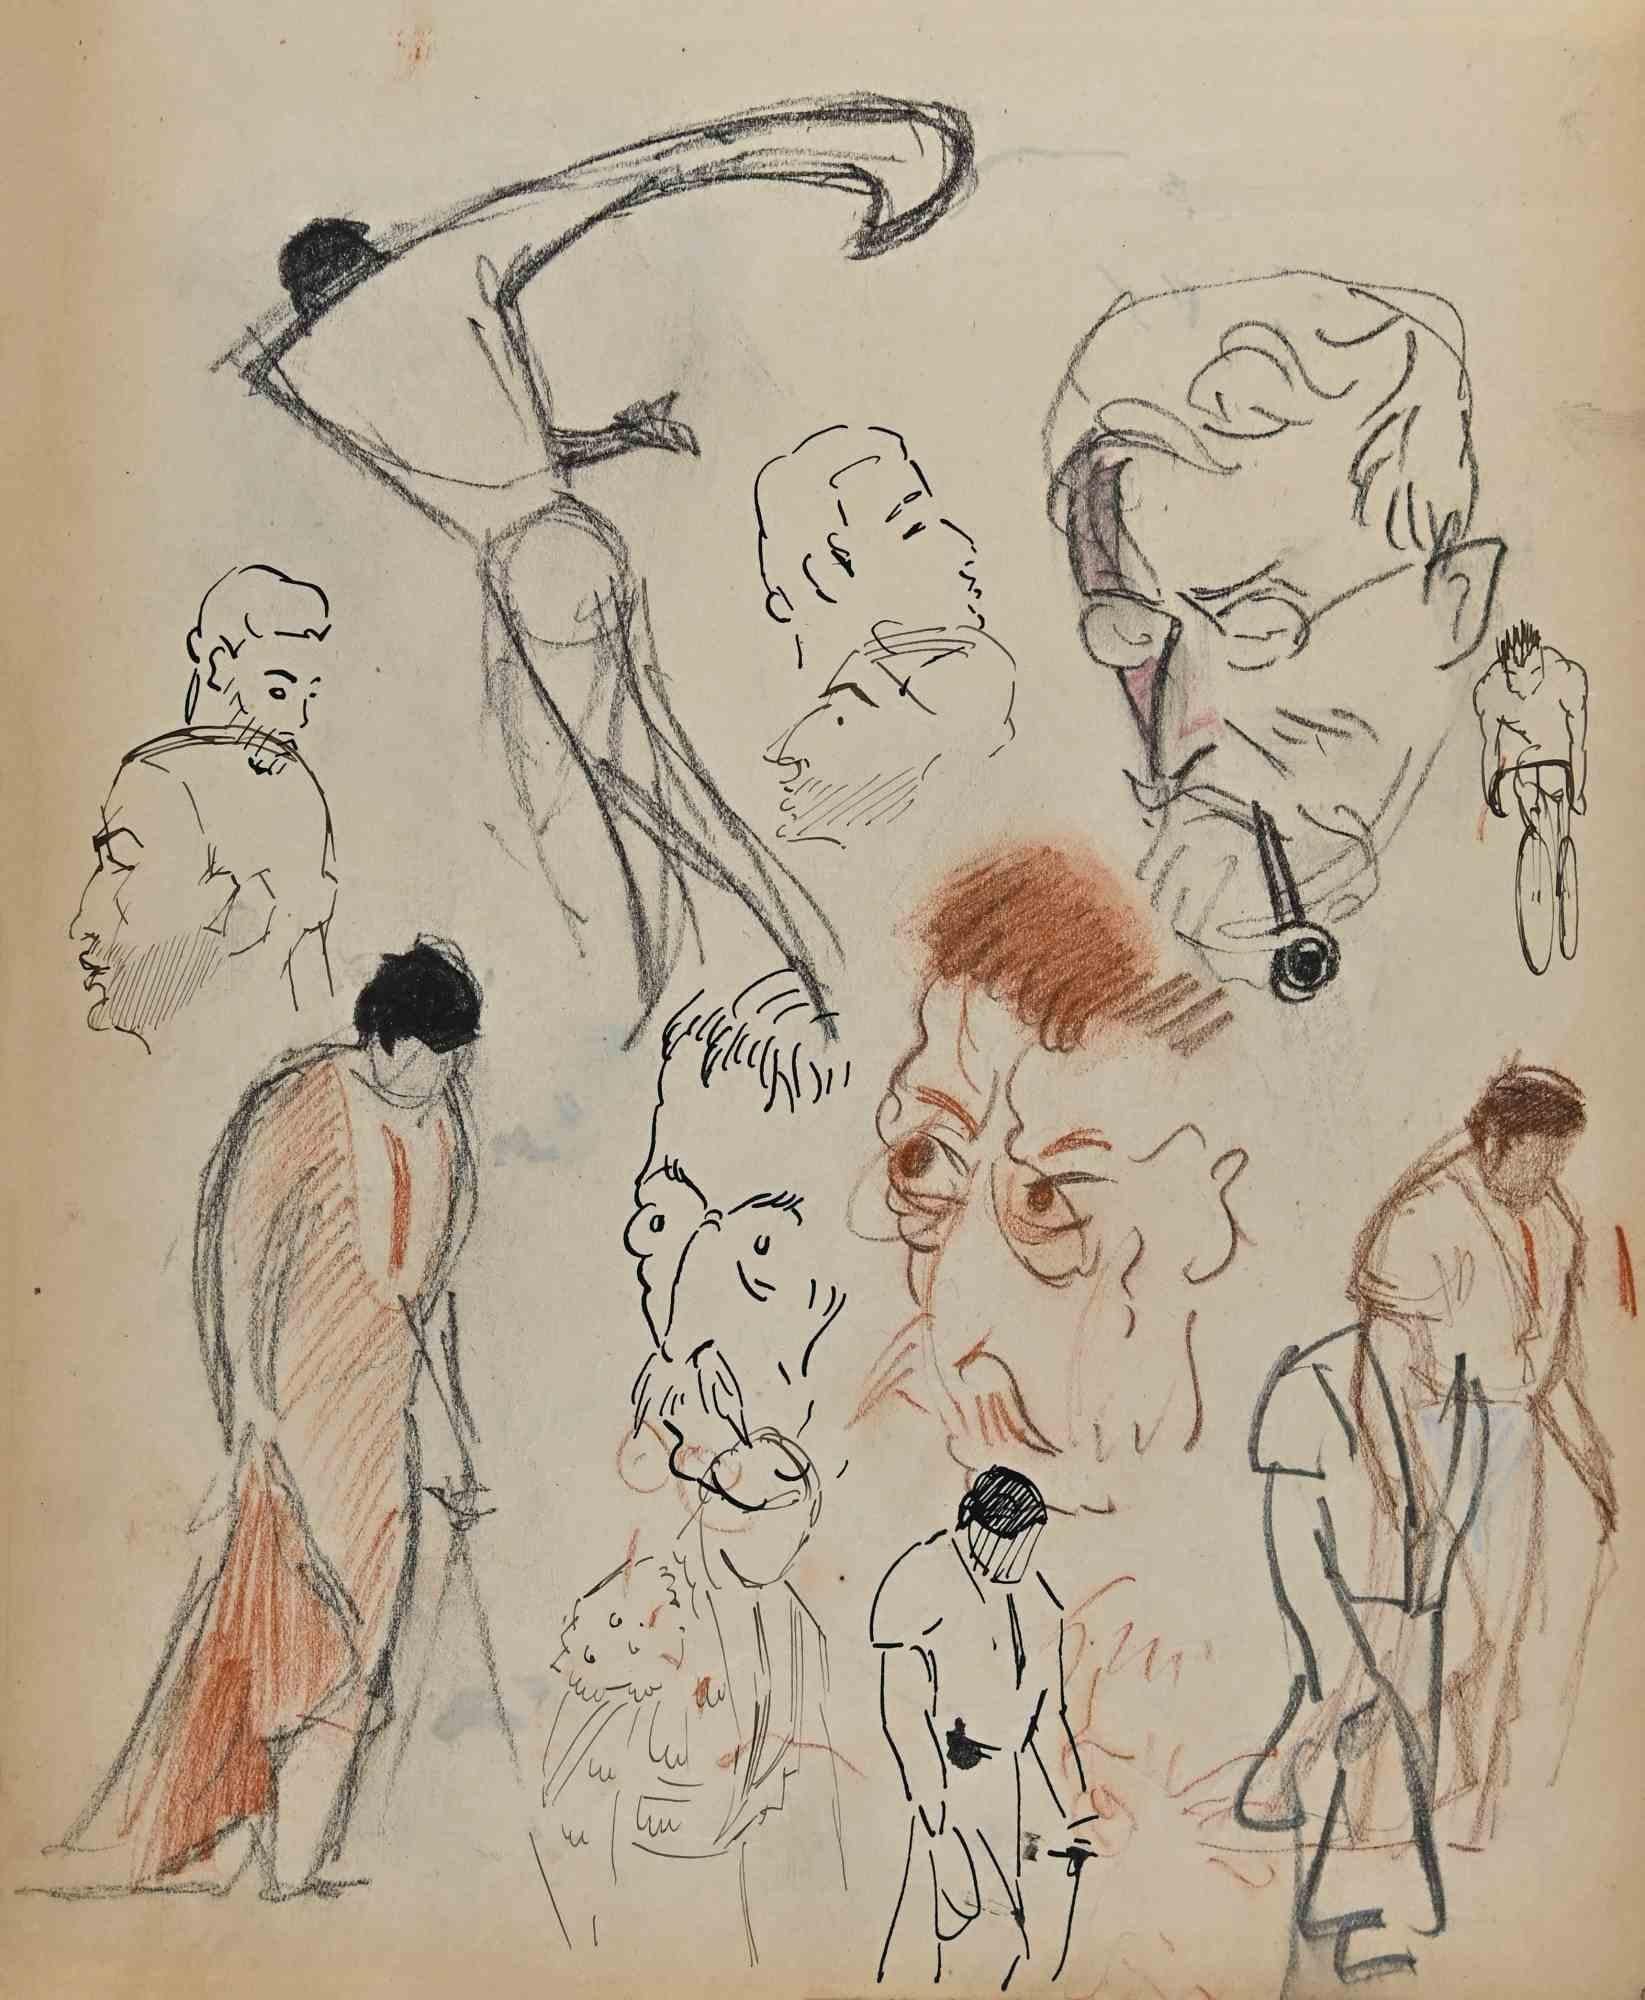 The Figures Sketches - Drawing by Norbert Meyre - Mid-20th Century